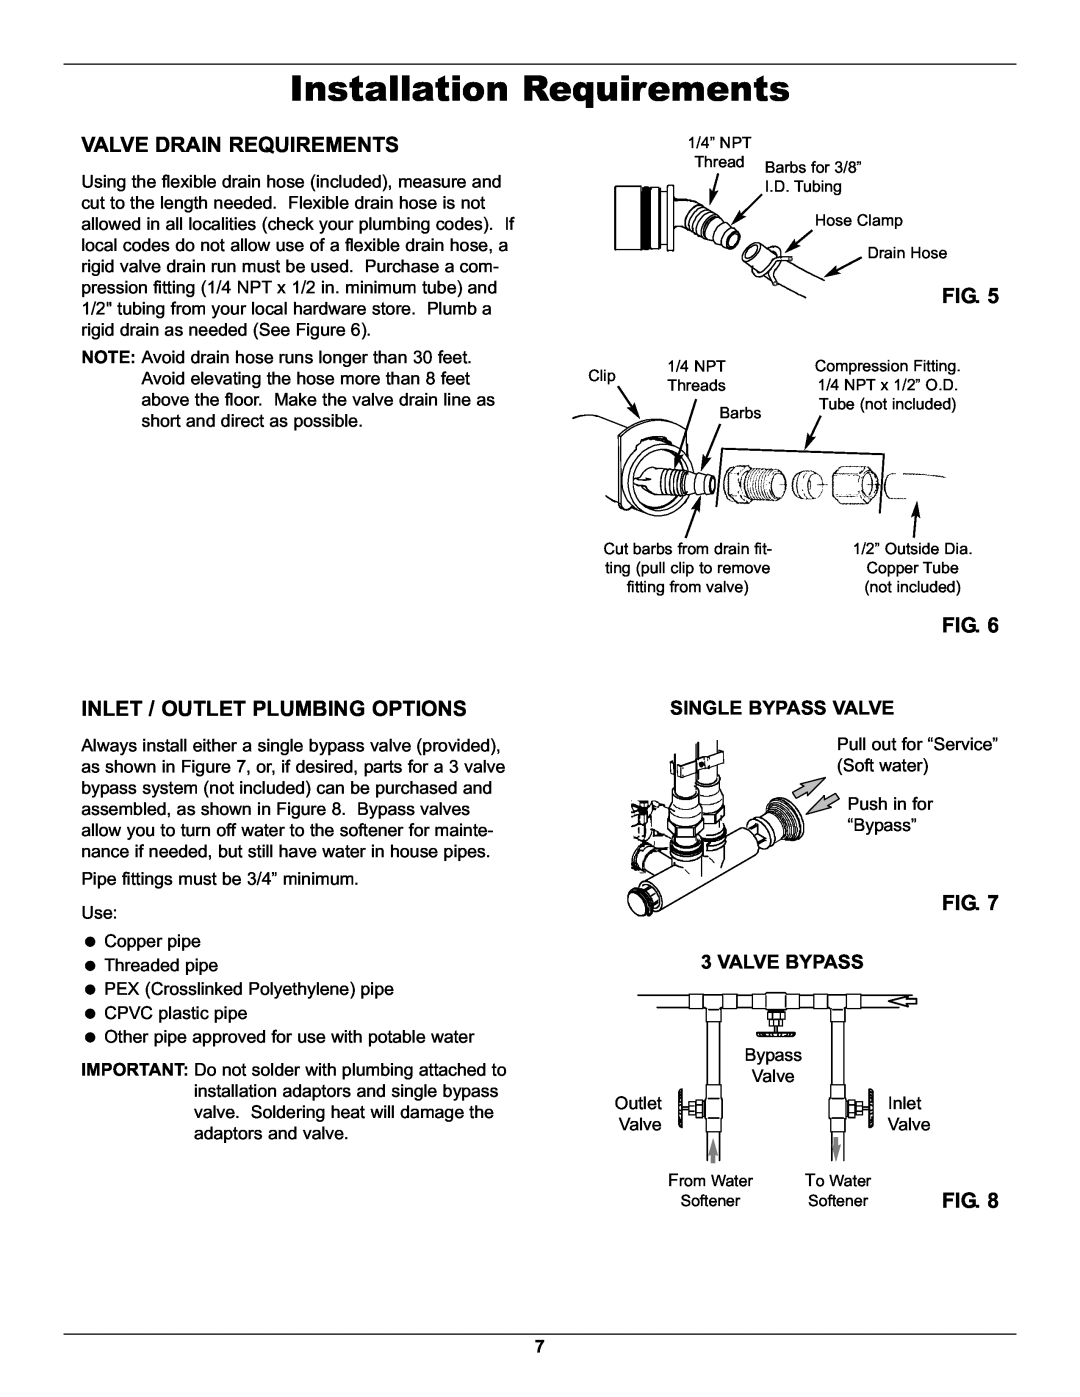 Whirlpool WHES40 Valve Drain Requirements, Inlet / Outlet Plumbing Options, Single Bypass Valve, Valve Bypass 